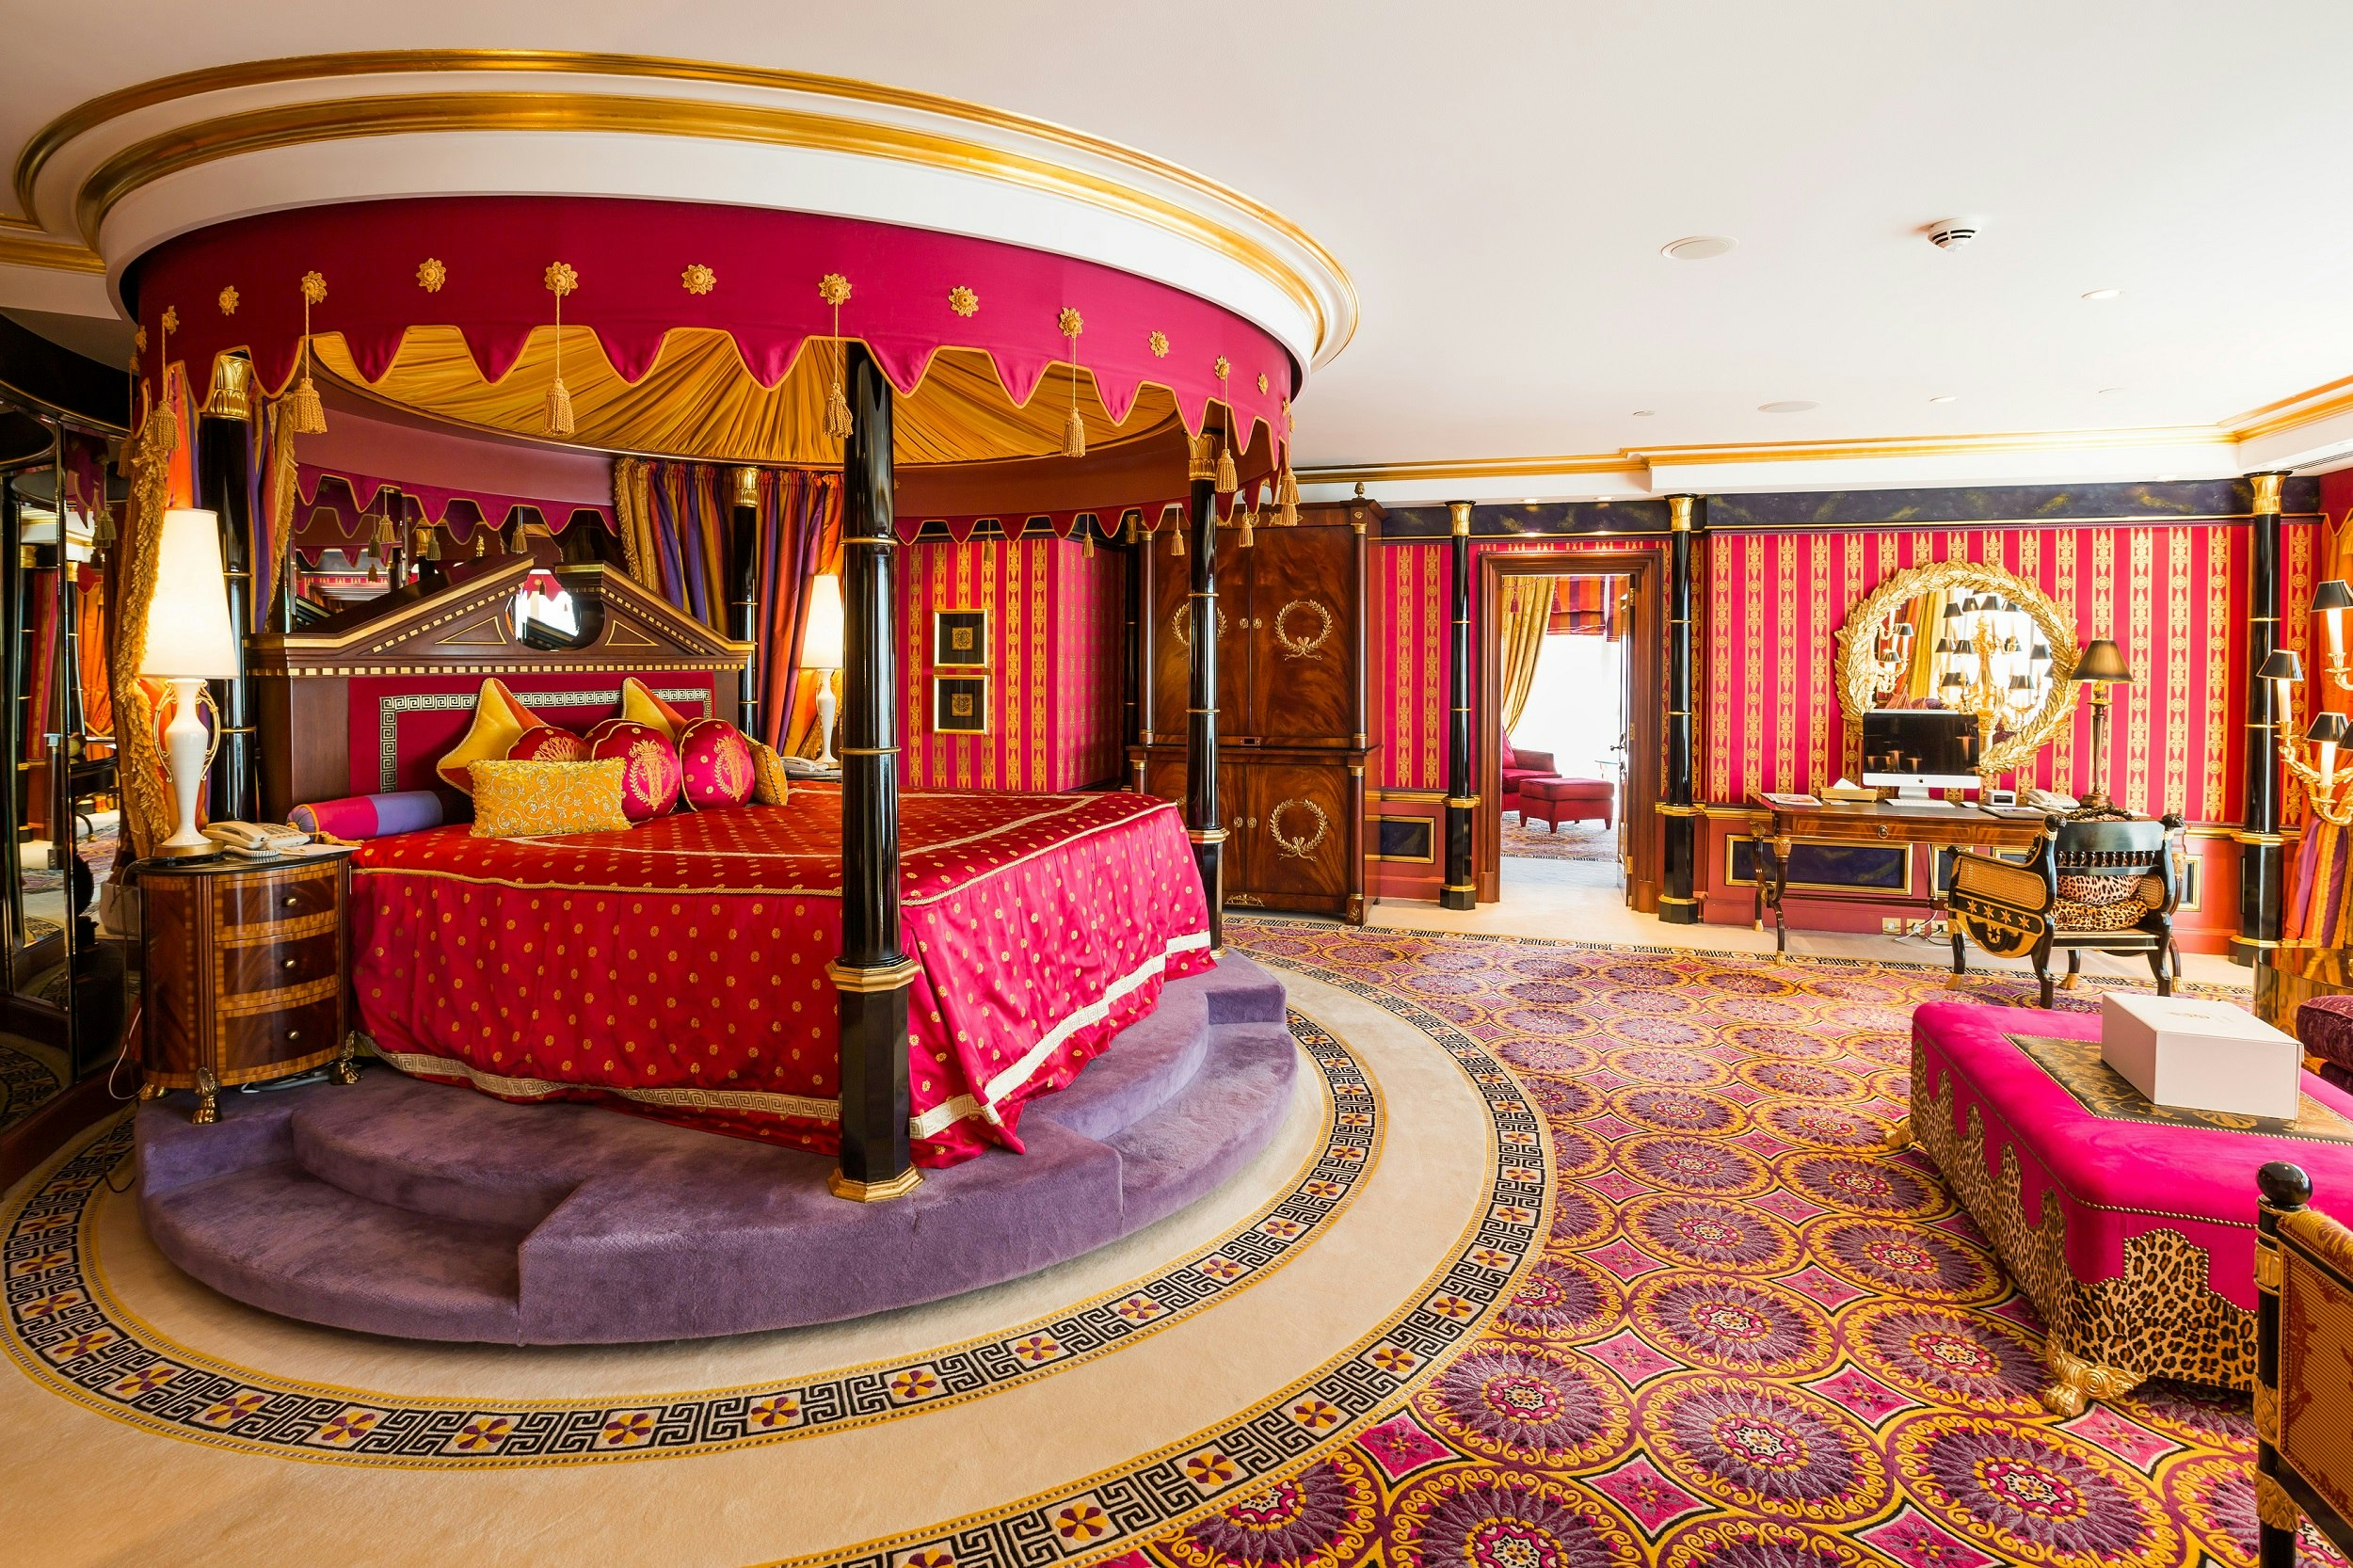 A bedroom with a large canopied bed. The decor is heavily patterned, predominantly in pink, purple and yellow